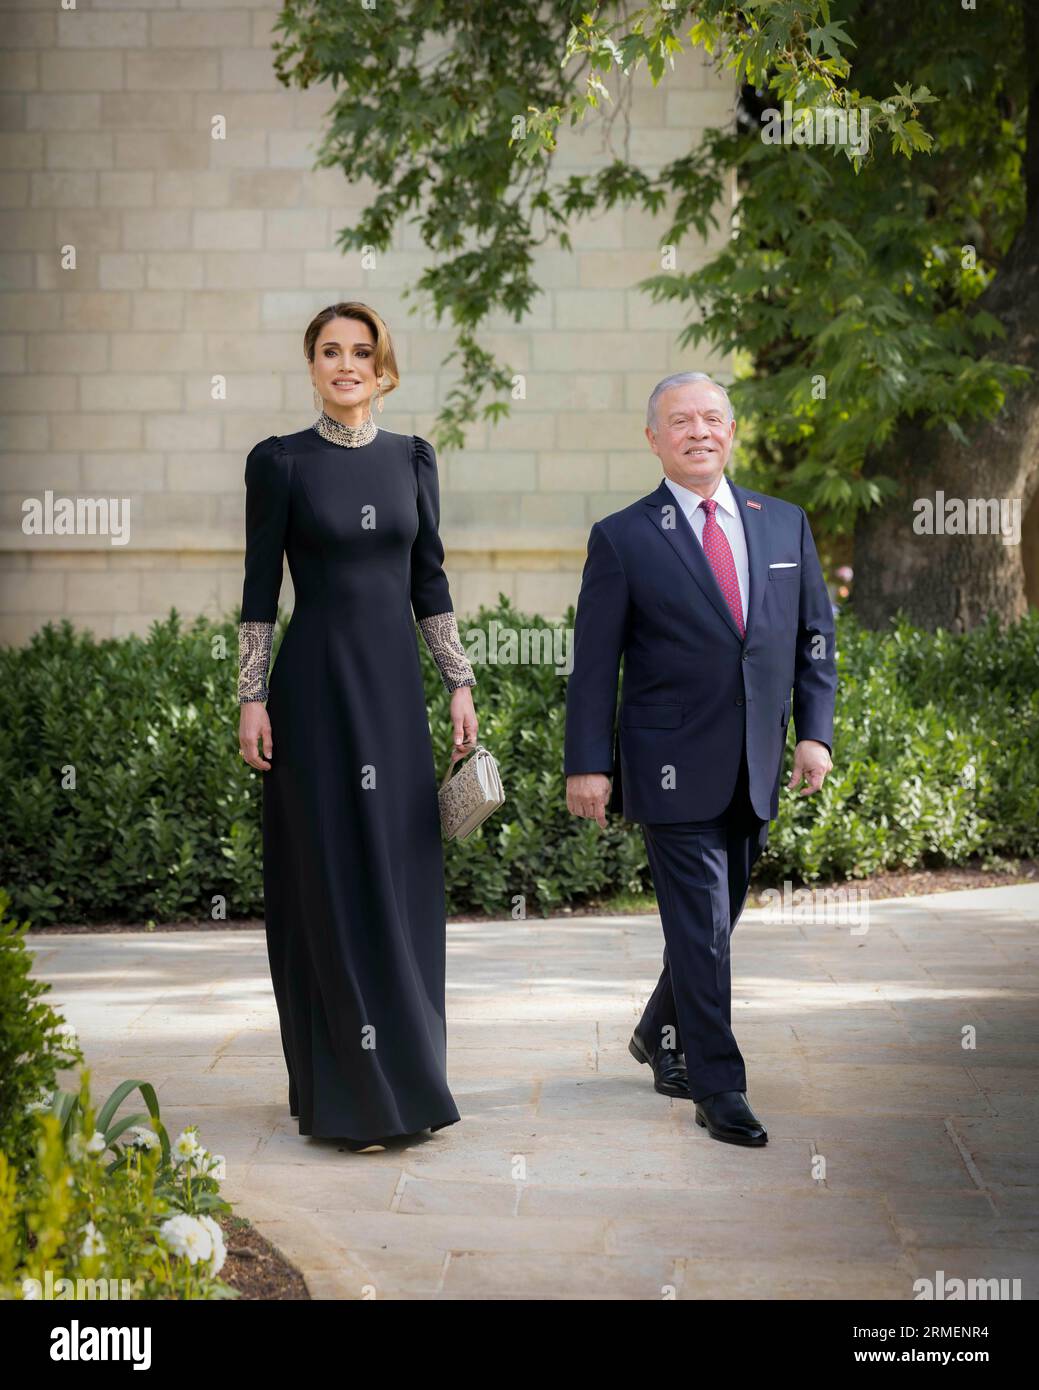 King Abdullah II and Queen Rania during the wedding ceremony of His Royal Highness Crown Prince Al Hussein and Her Royal Highness Princess Rajwa Al Hussein, on June 01, 2023, pictures on the occasion of Queen Rania Al Abdullah celebrating her birthday on Thursday, August 31, 2023 Photo: Royal Hashemite Court / Albert Nieboer / Netherlands OUT / Point De Vue OUT Stock Photo